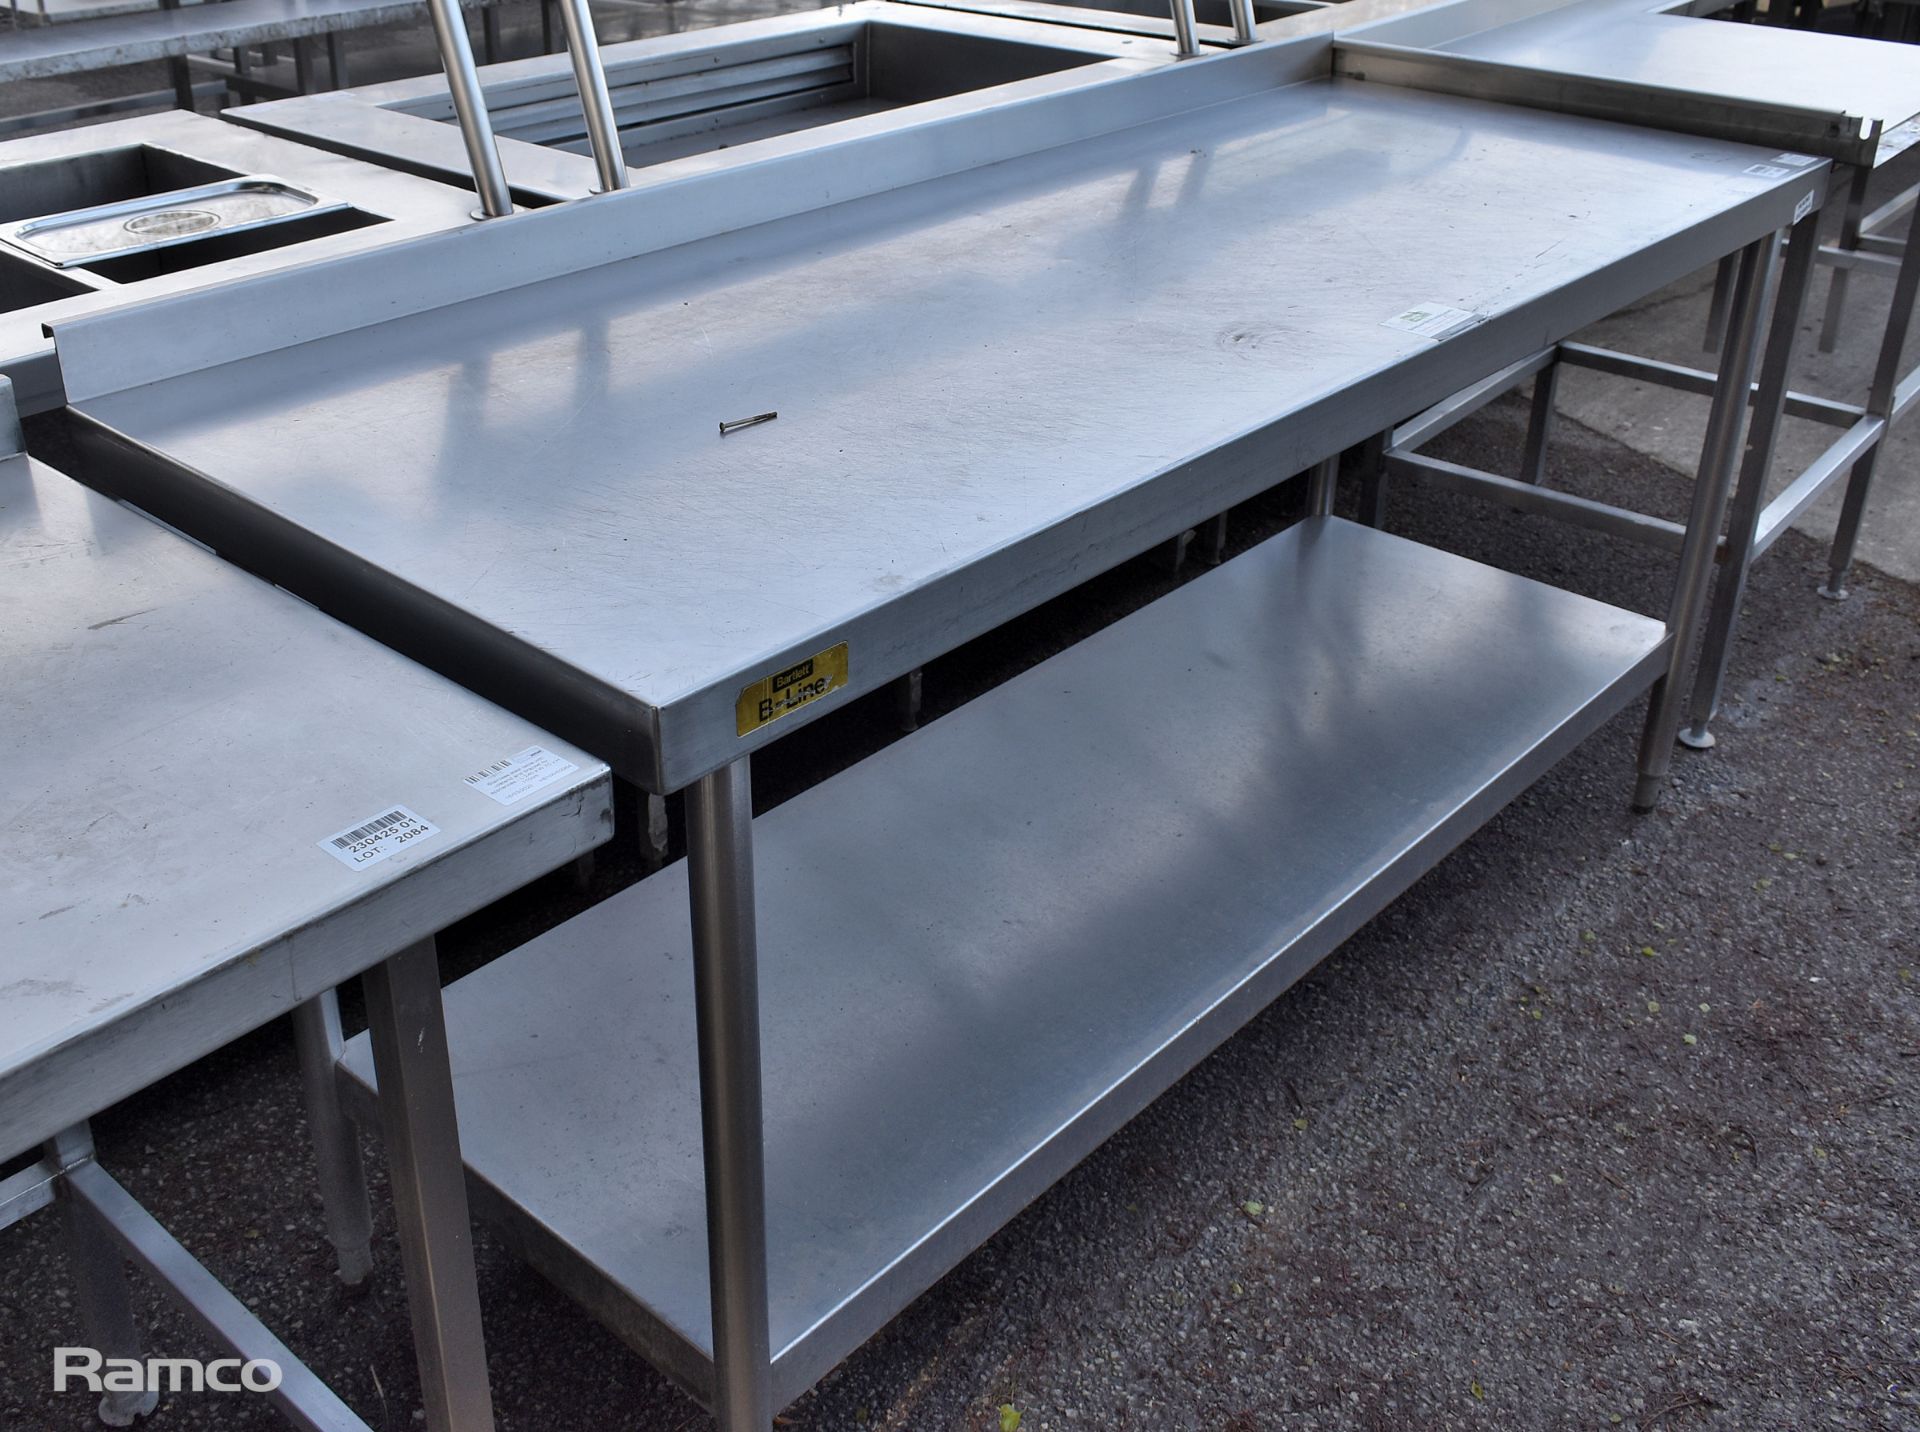 Stainless steel table with upstand and single bottom shelf - L 180 x W 70 x H 93cm - Image 2 of 5